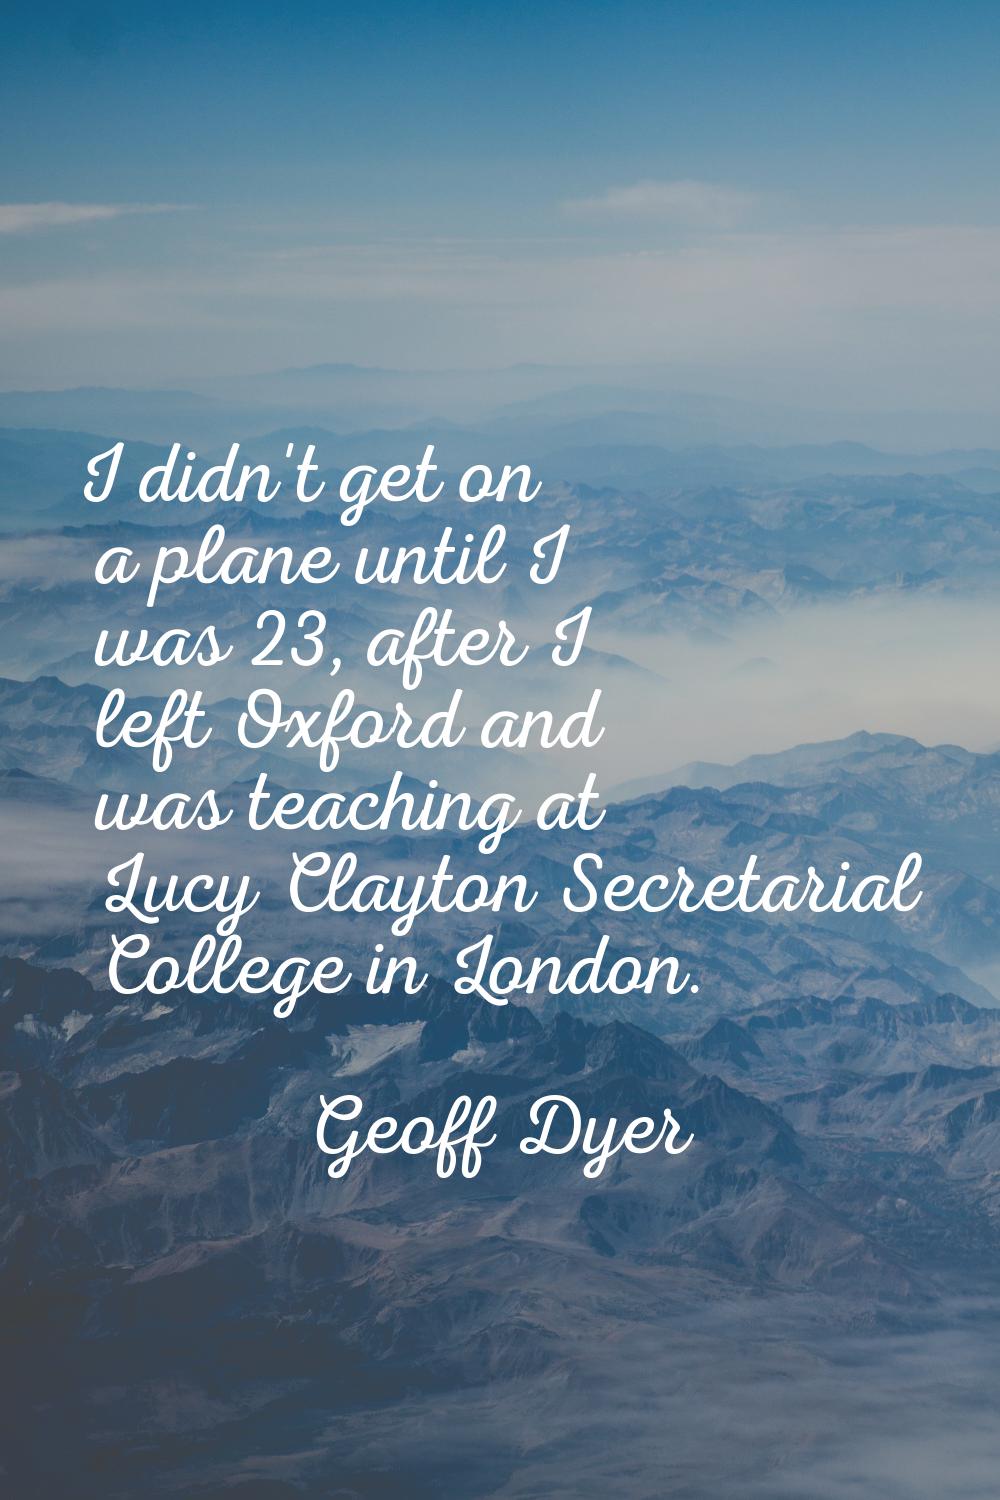 I didn't get on a plane until I was 23, after I left Oxford and was teaching at Lucy Clayton Secret